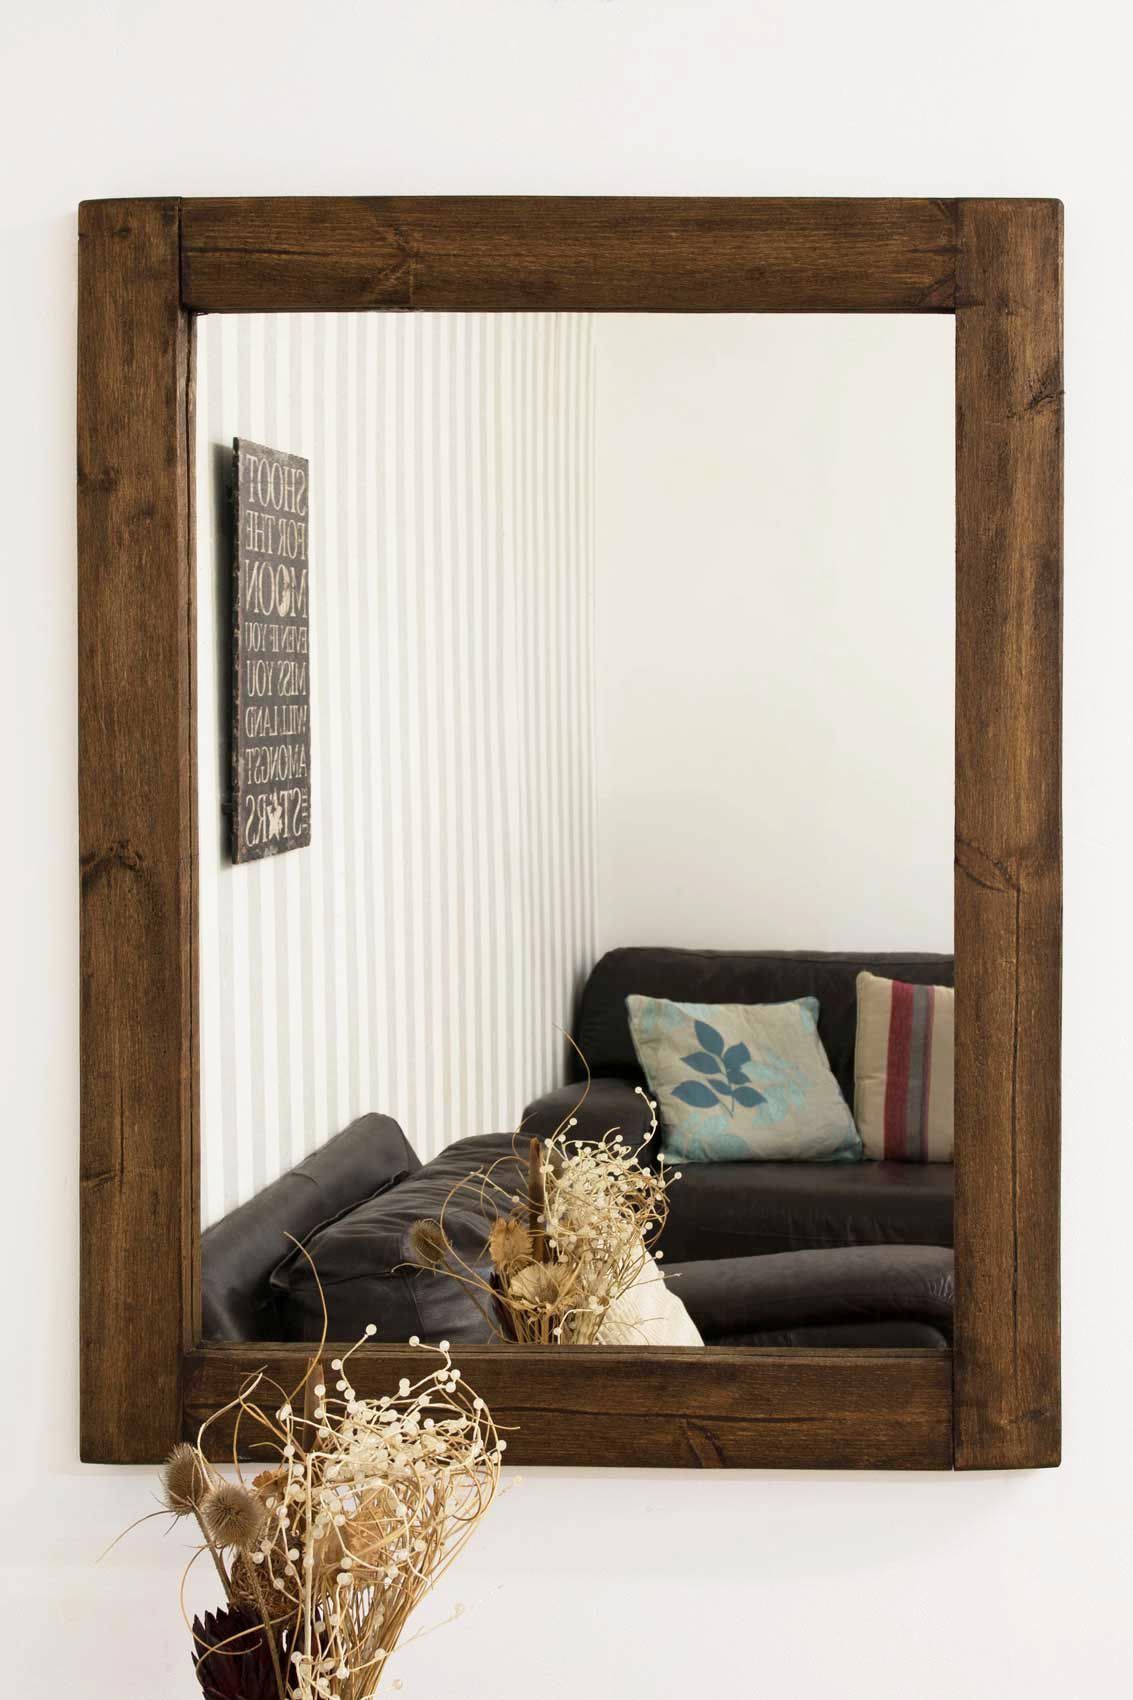 Madrid Rustic Wooden Wall Mirror 30x40 – Ayers And Graces For Rustic Getaway Wood Wall Mirrors (View 13 of 15)